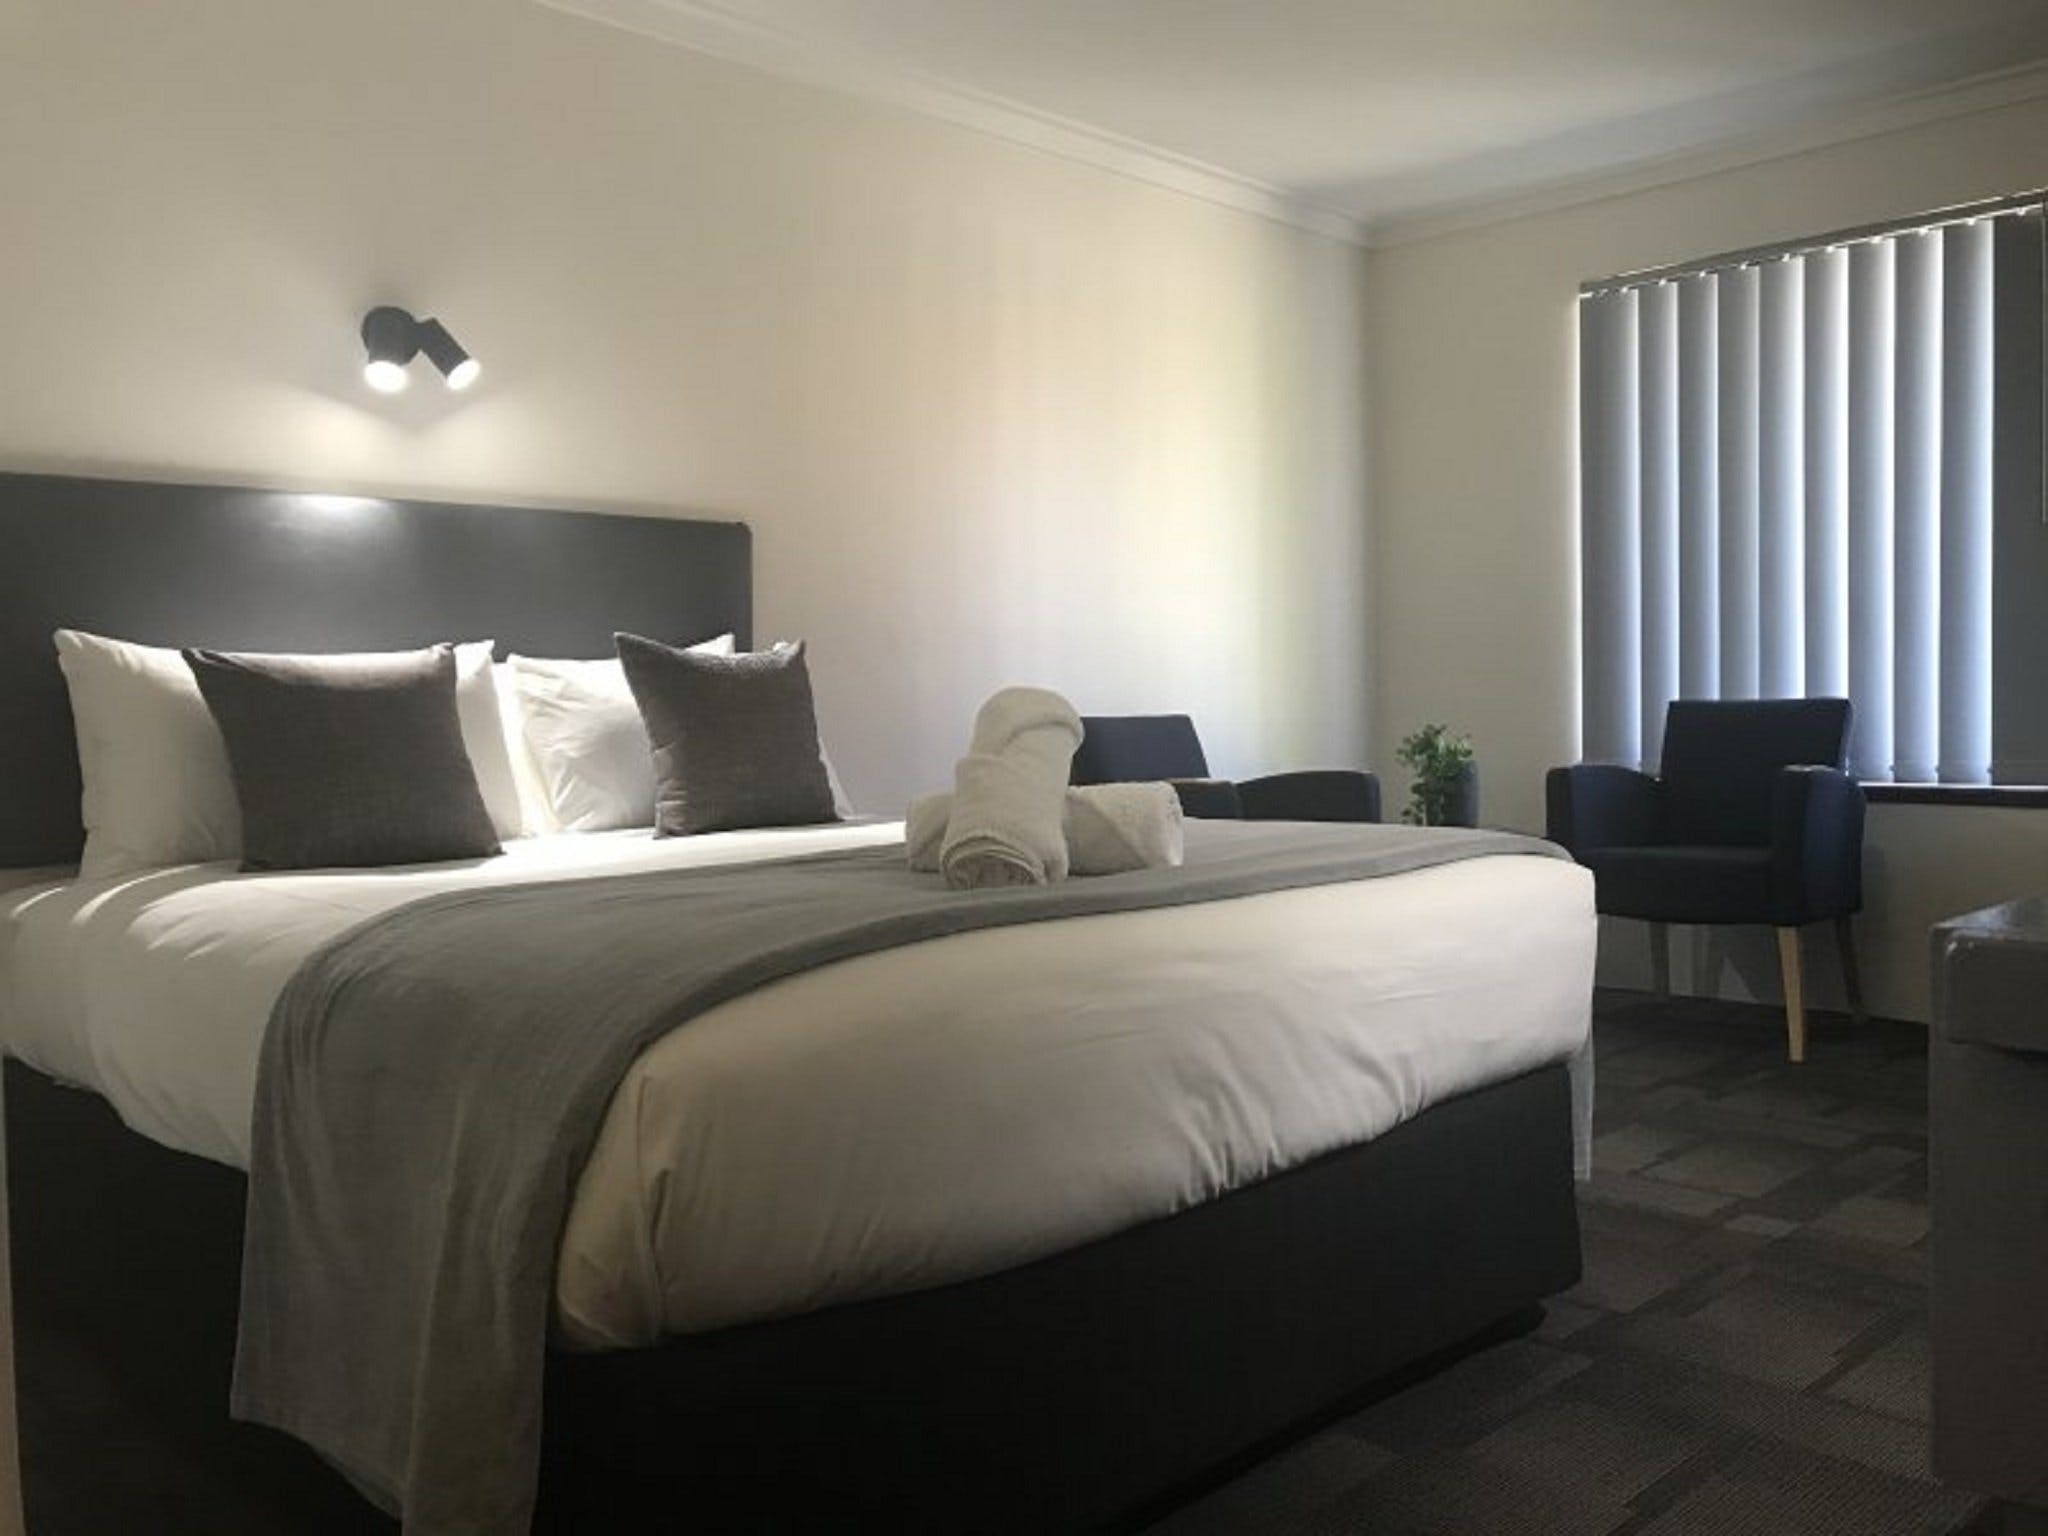 Hotel Clipper - Accommodation in Surfers Paradise